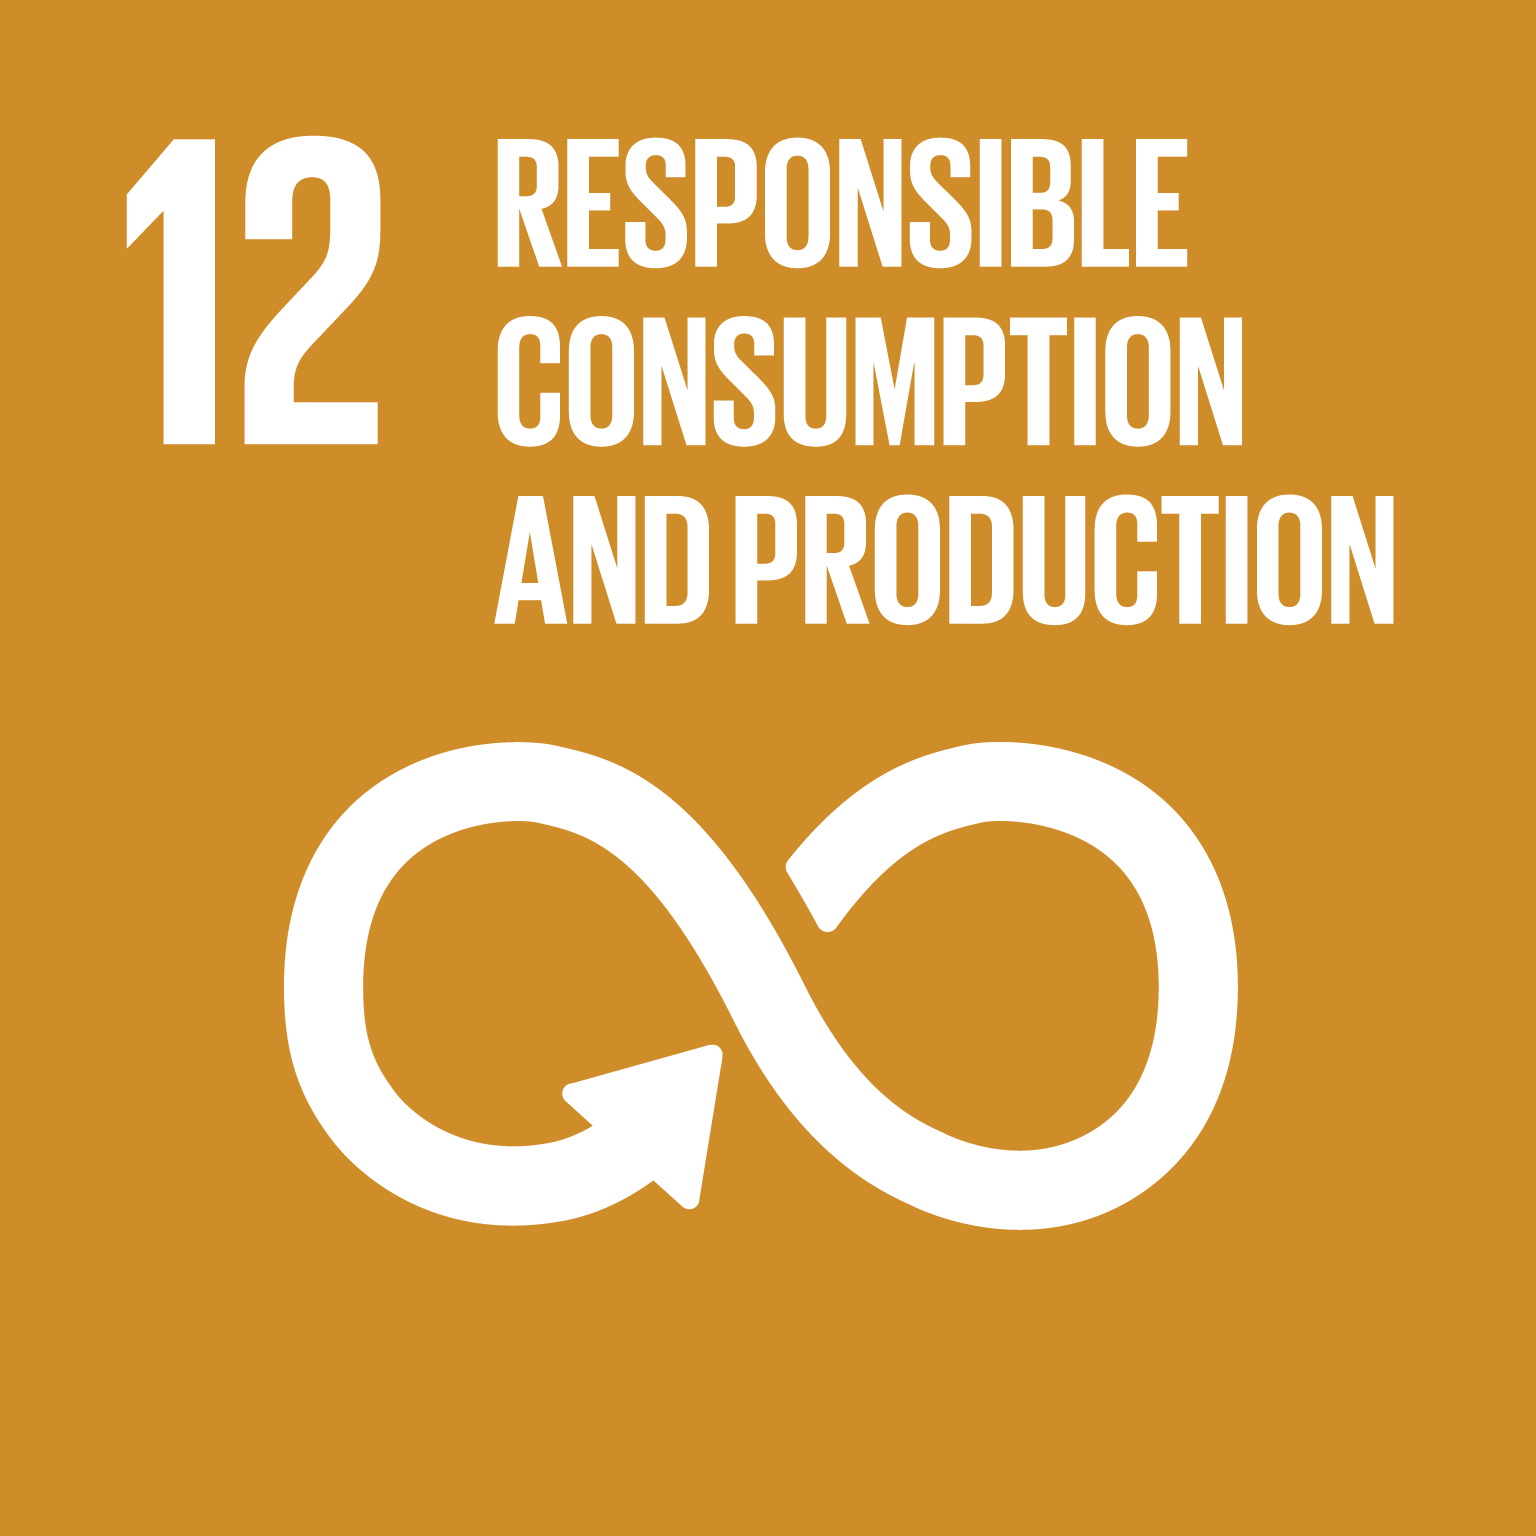 12: Responsible consumption and production